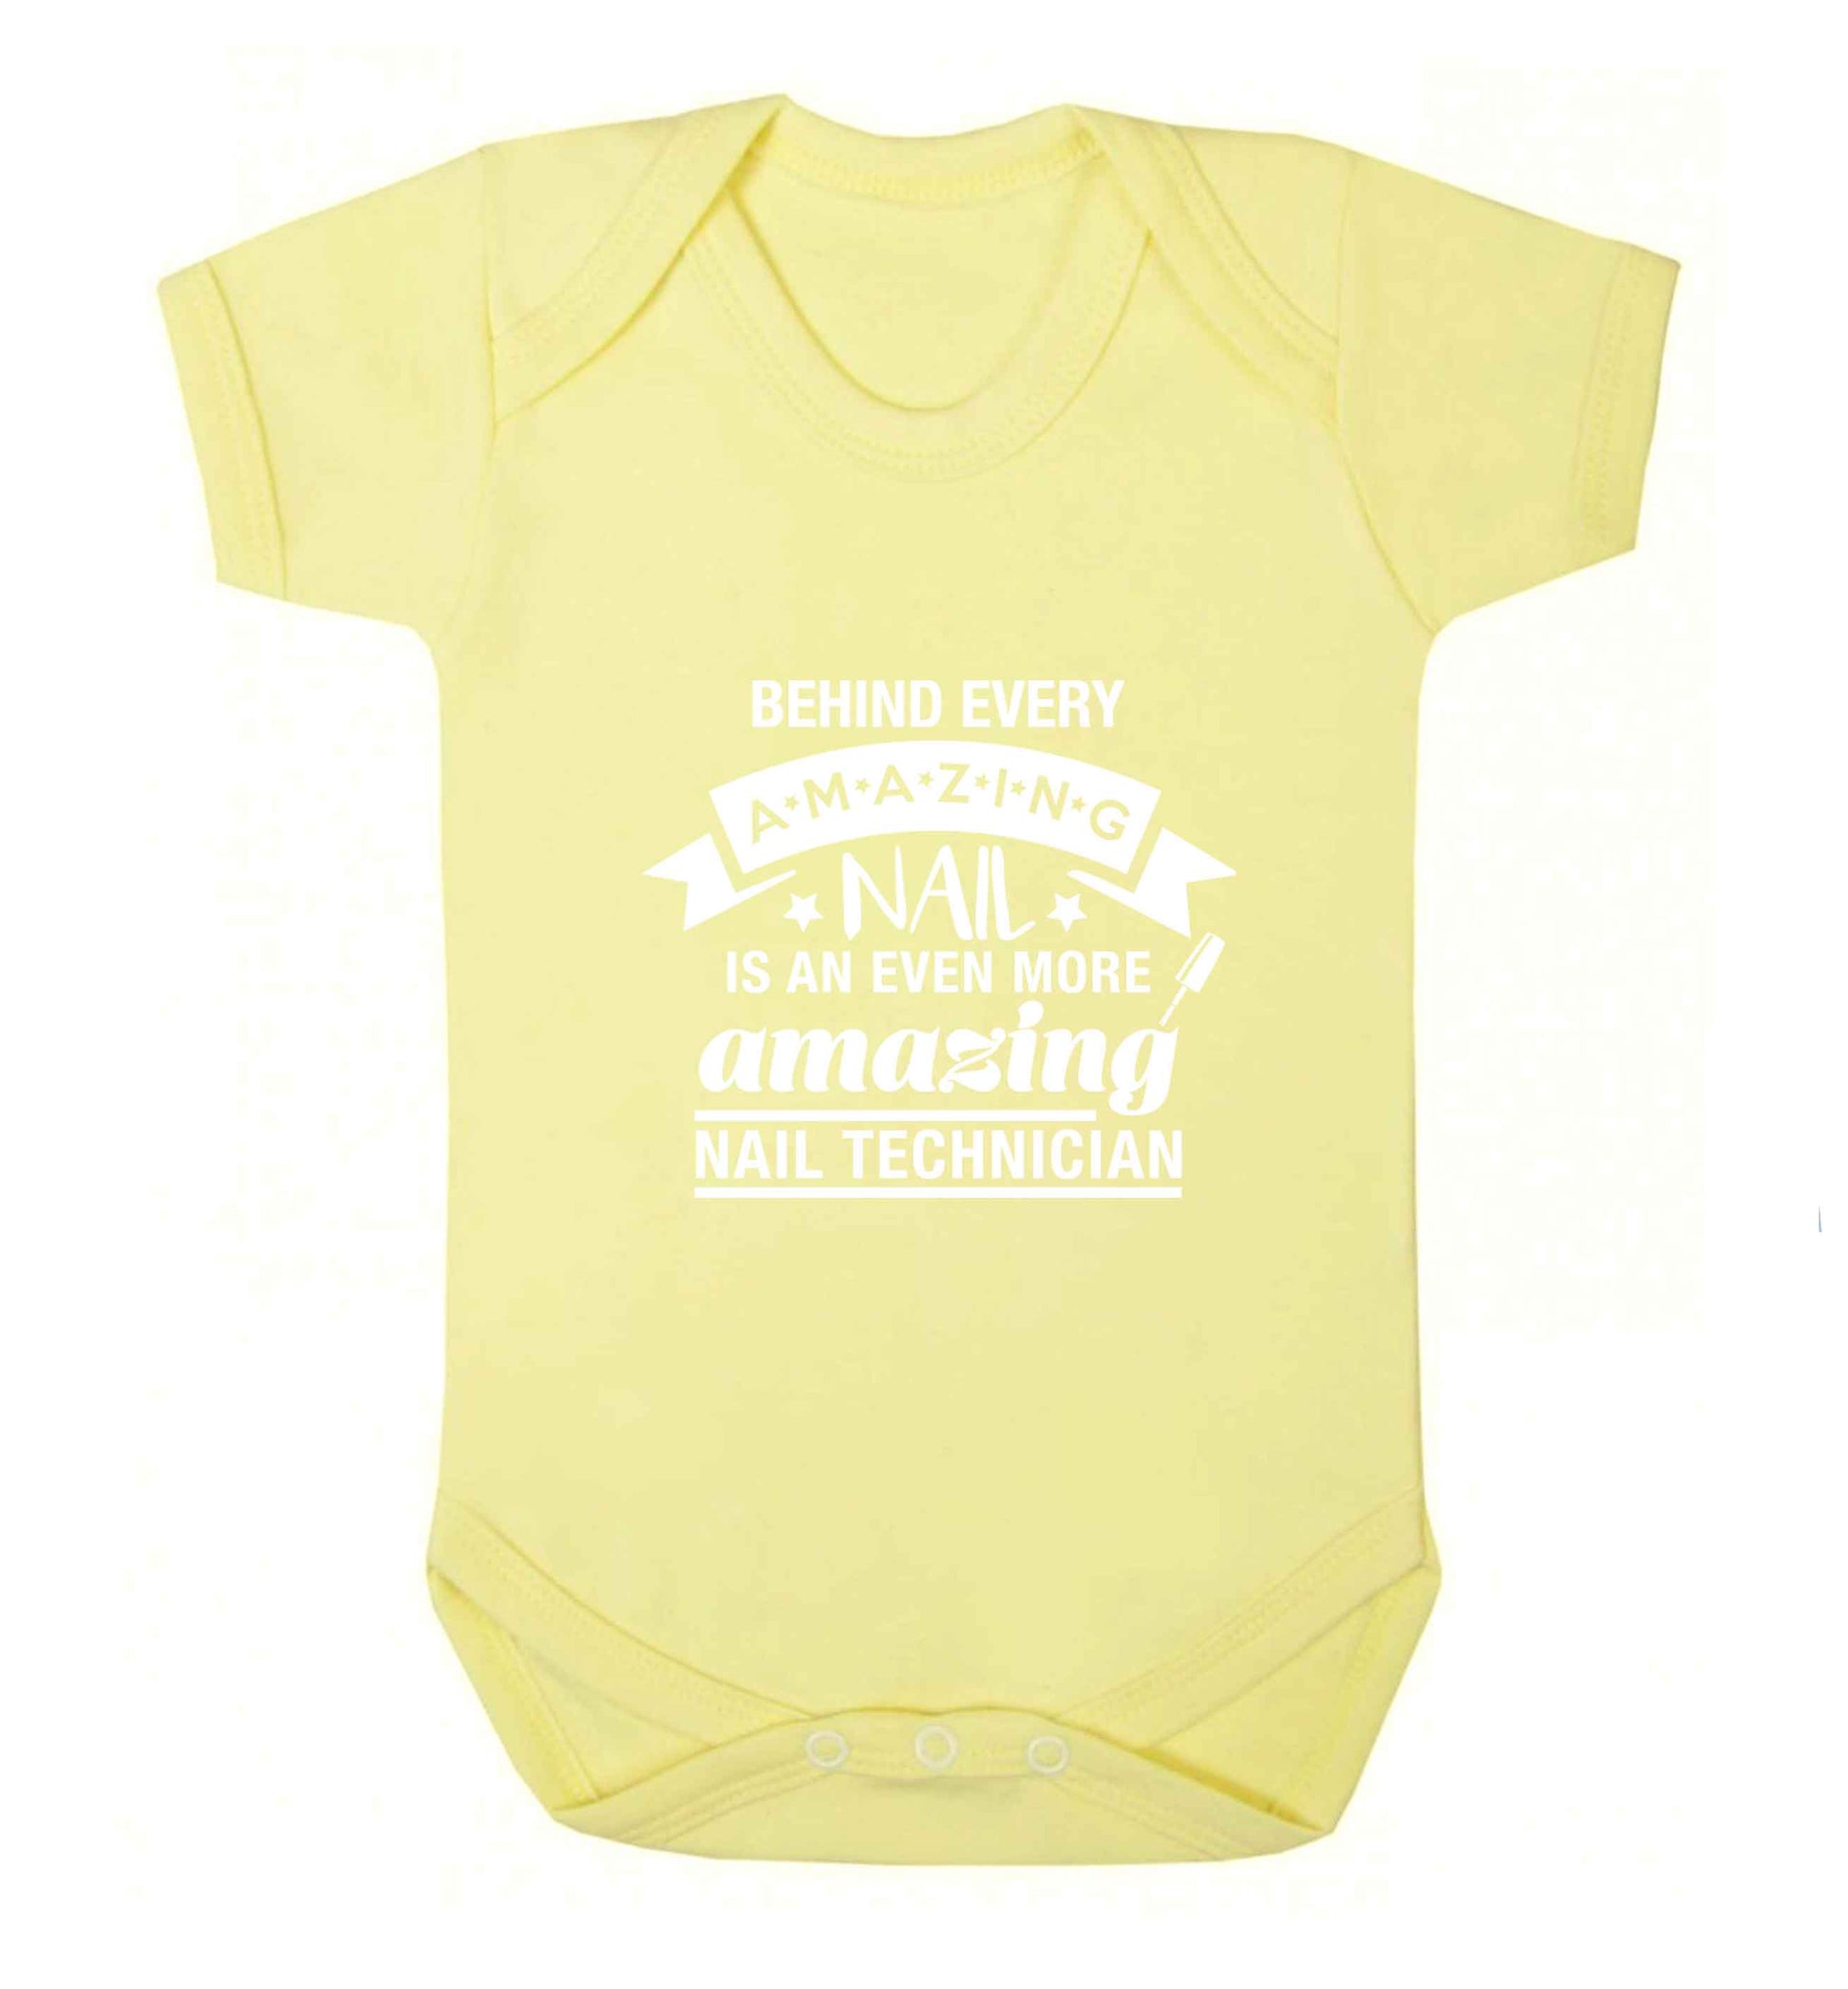 Behind every amazing nail is an even more amazing nail technician baby vest pale yellow 18-24 months